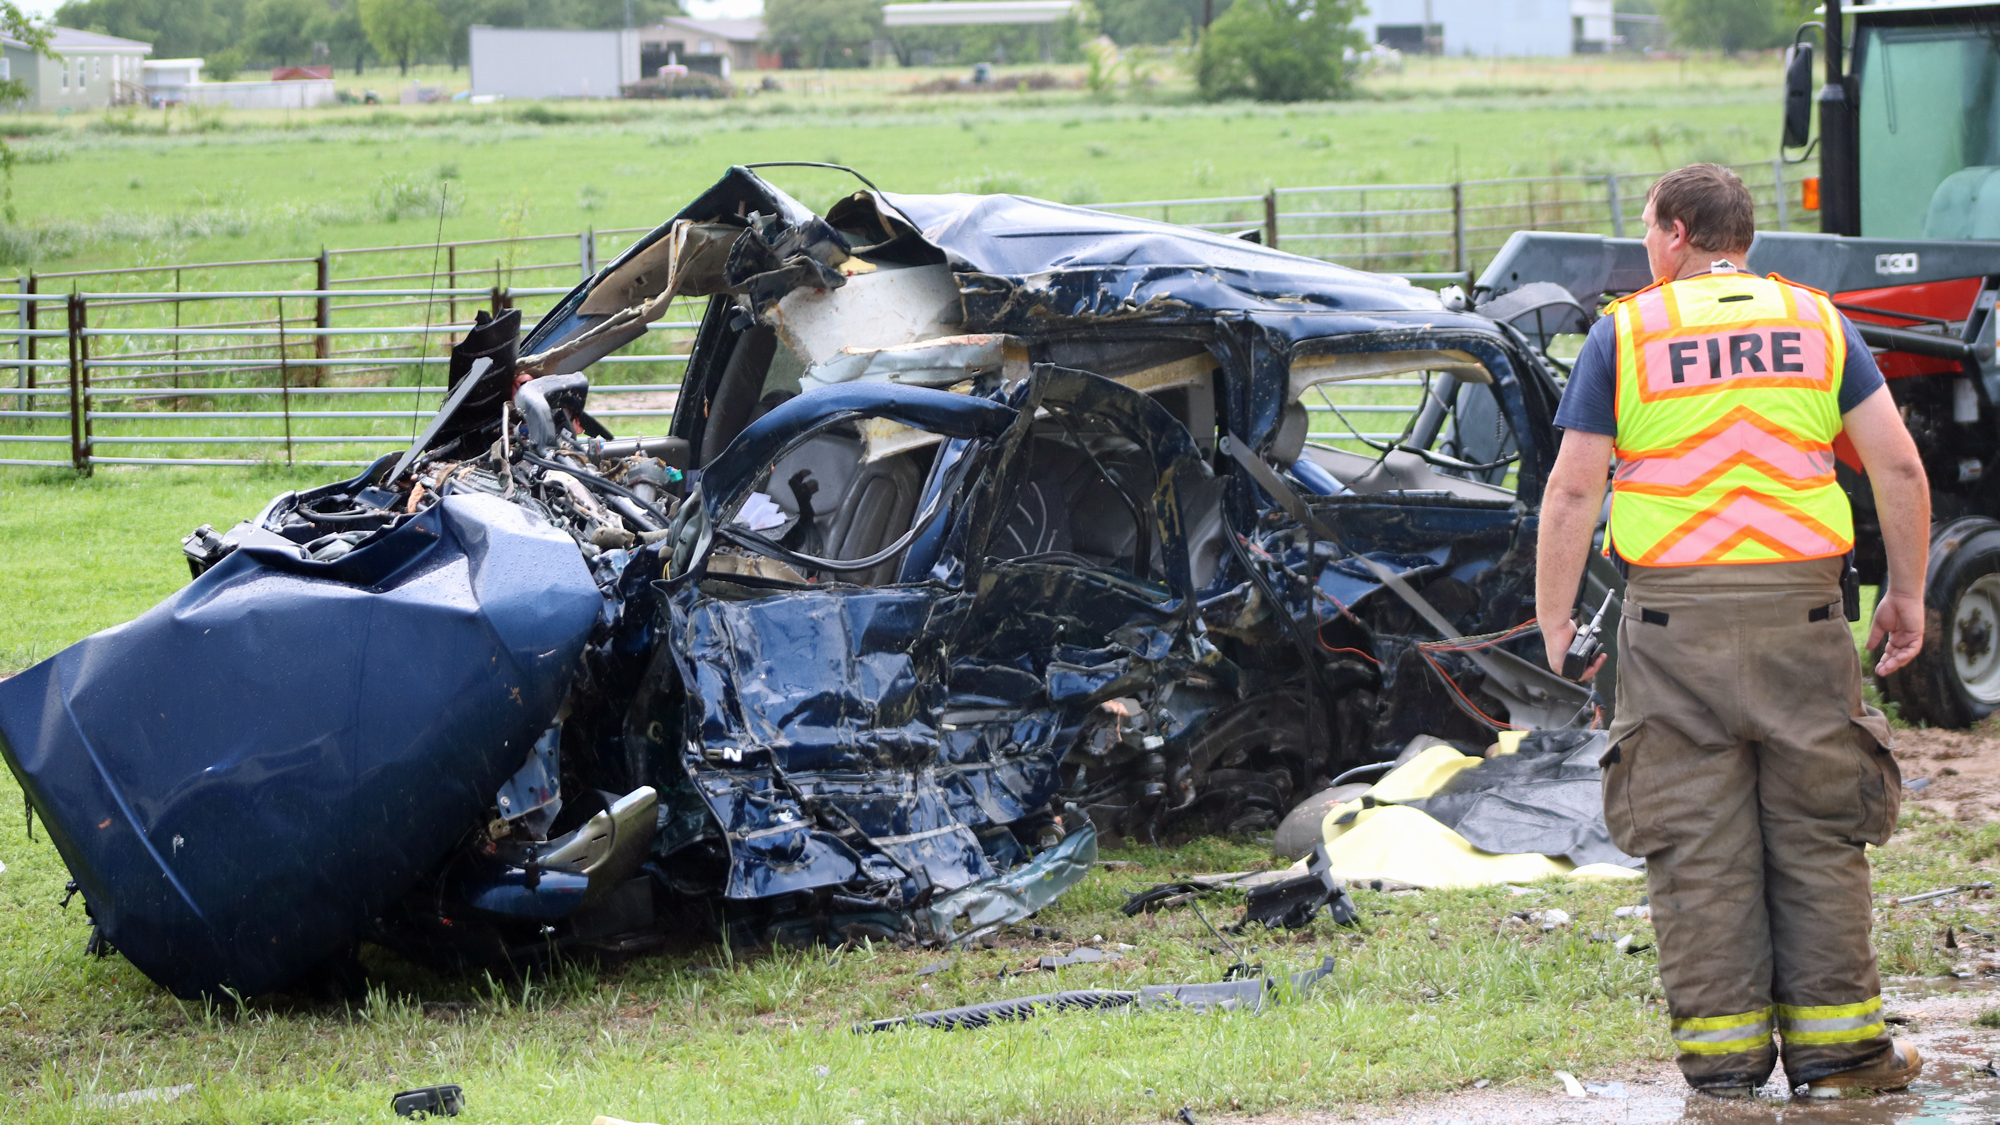 40++ Fatal car accident in waco texas yesterday info